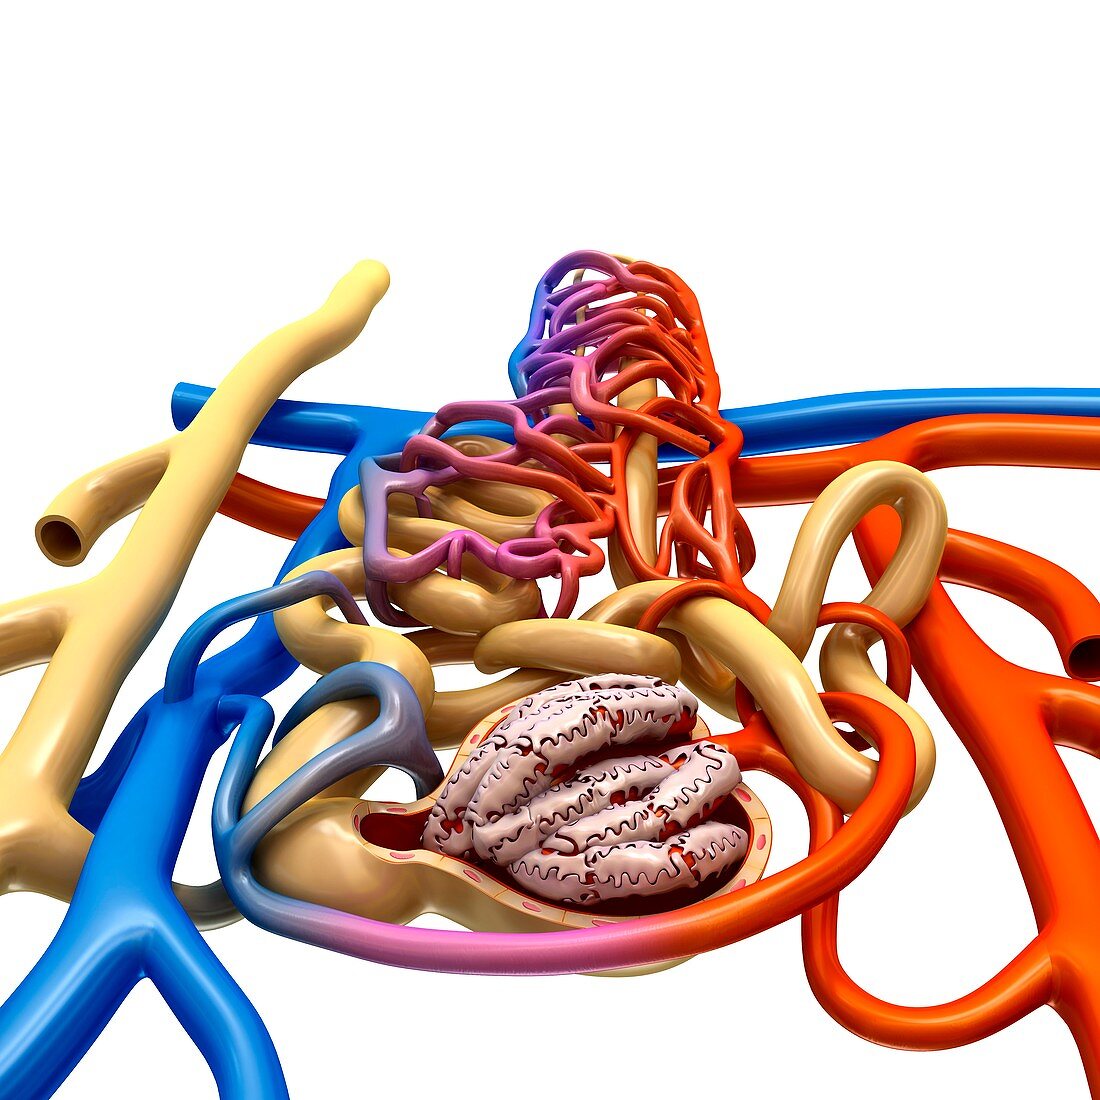 Nephron structure in a kidney, illustration